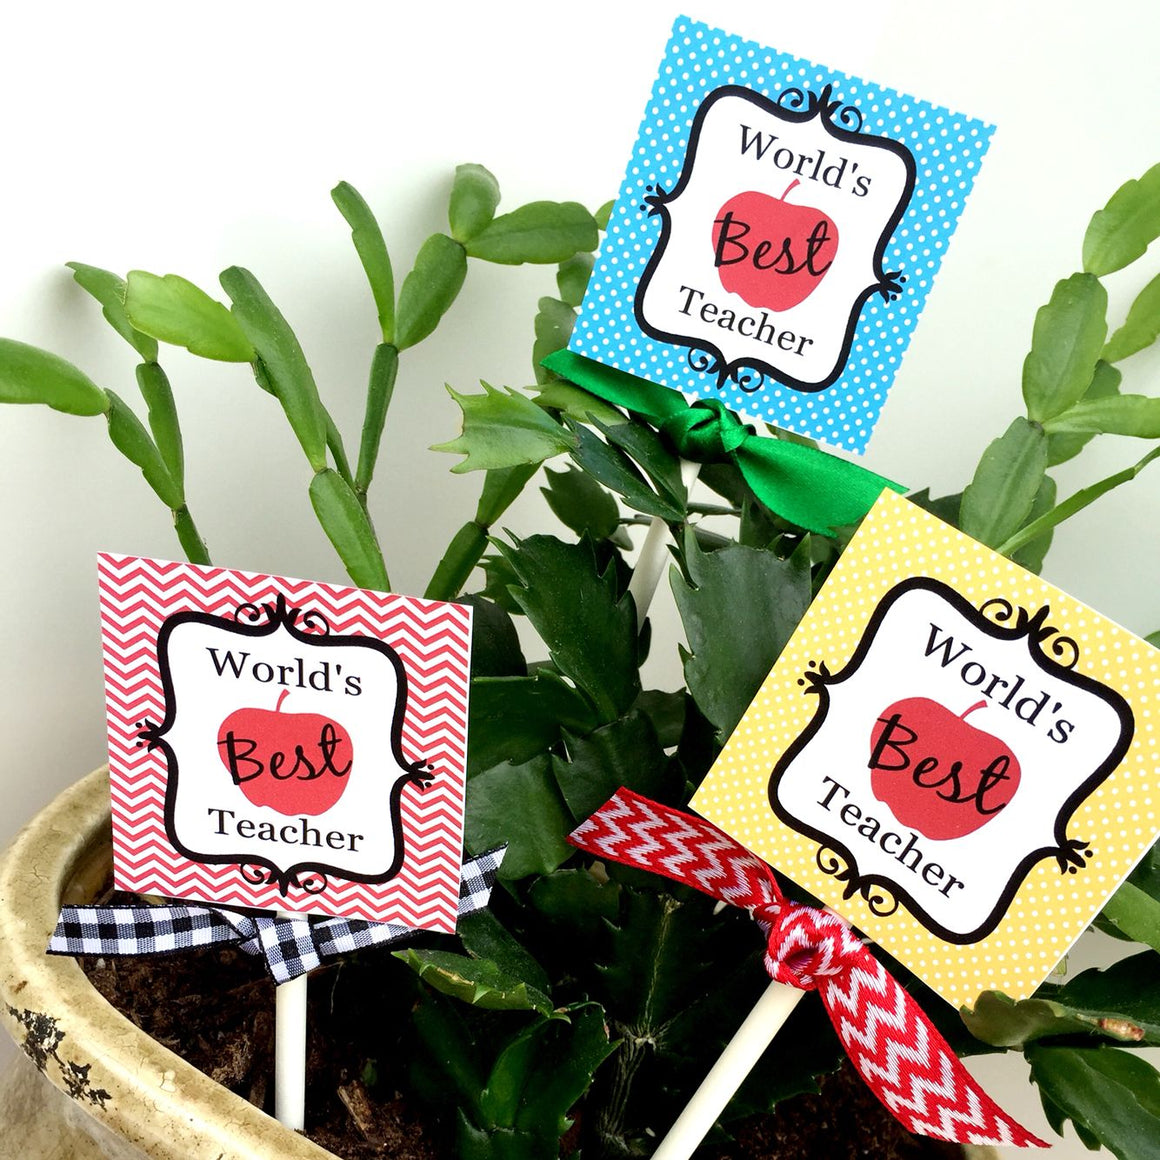 Printable Teacher Appreciation Tags, World's Best Teacher Gift Tags, Teacher Appreciation Plant Stake Tags by SUNSHINETULIPDESIGN